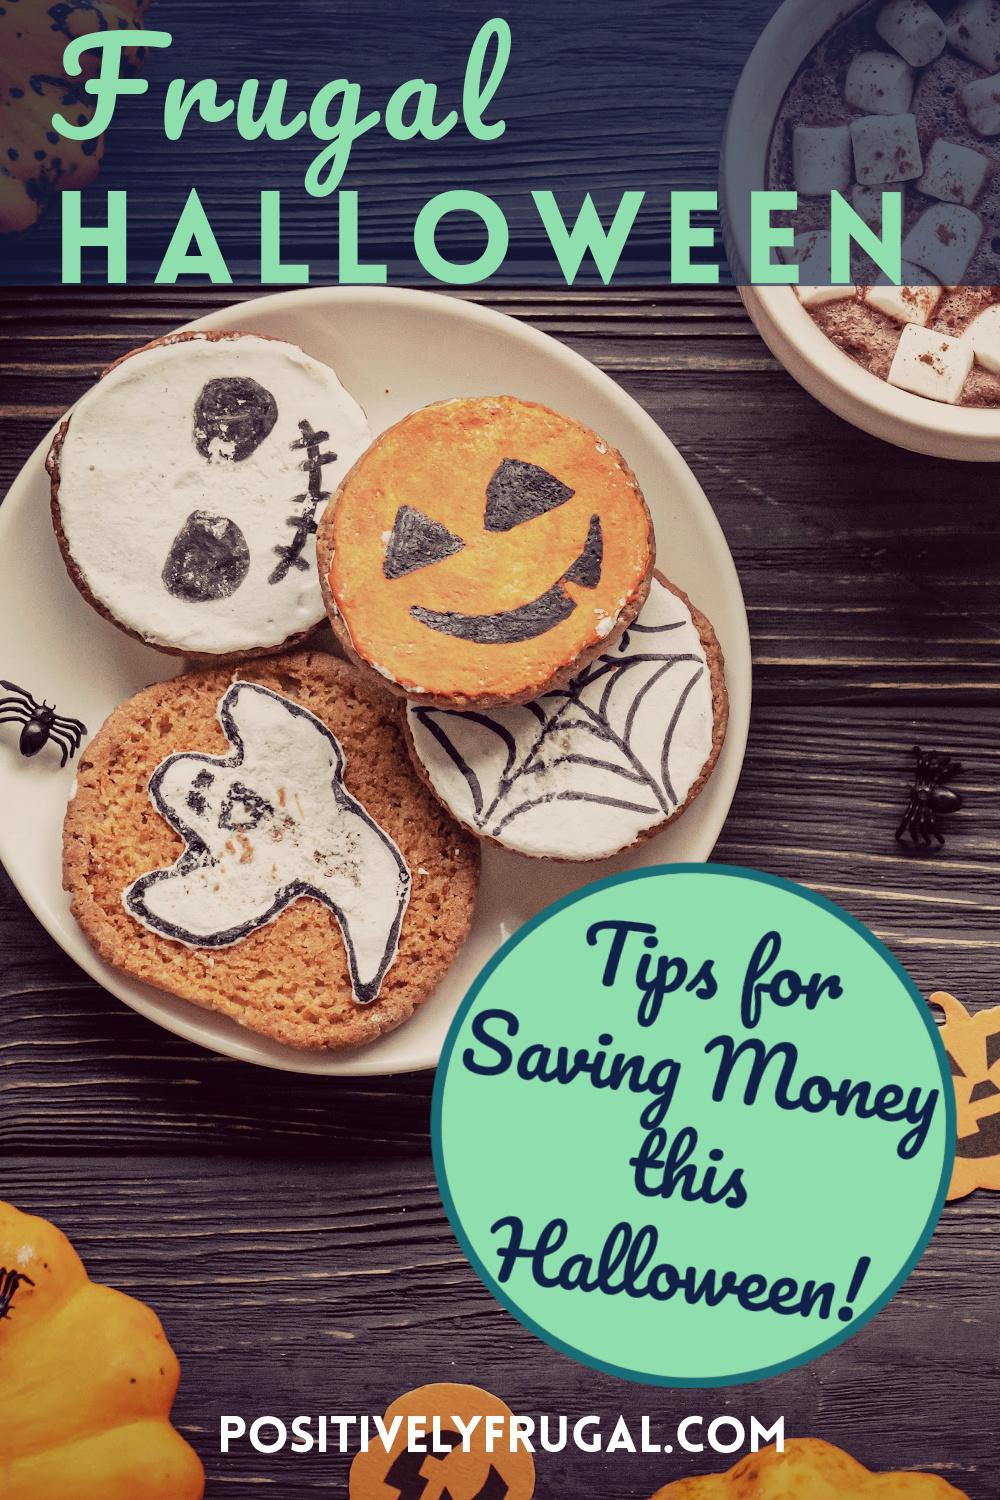 Frugal Halloween Tips for Saving Money by PositivelyFrugal.com